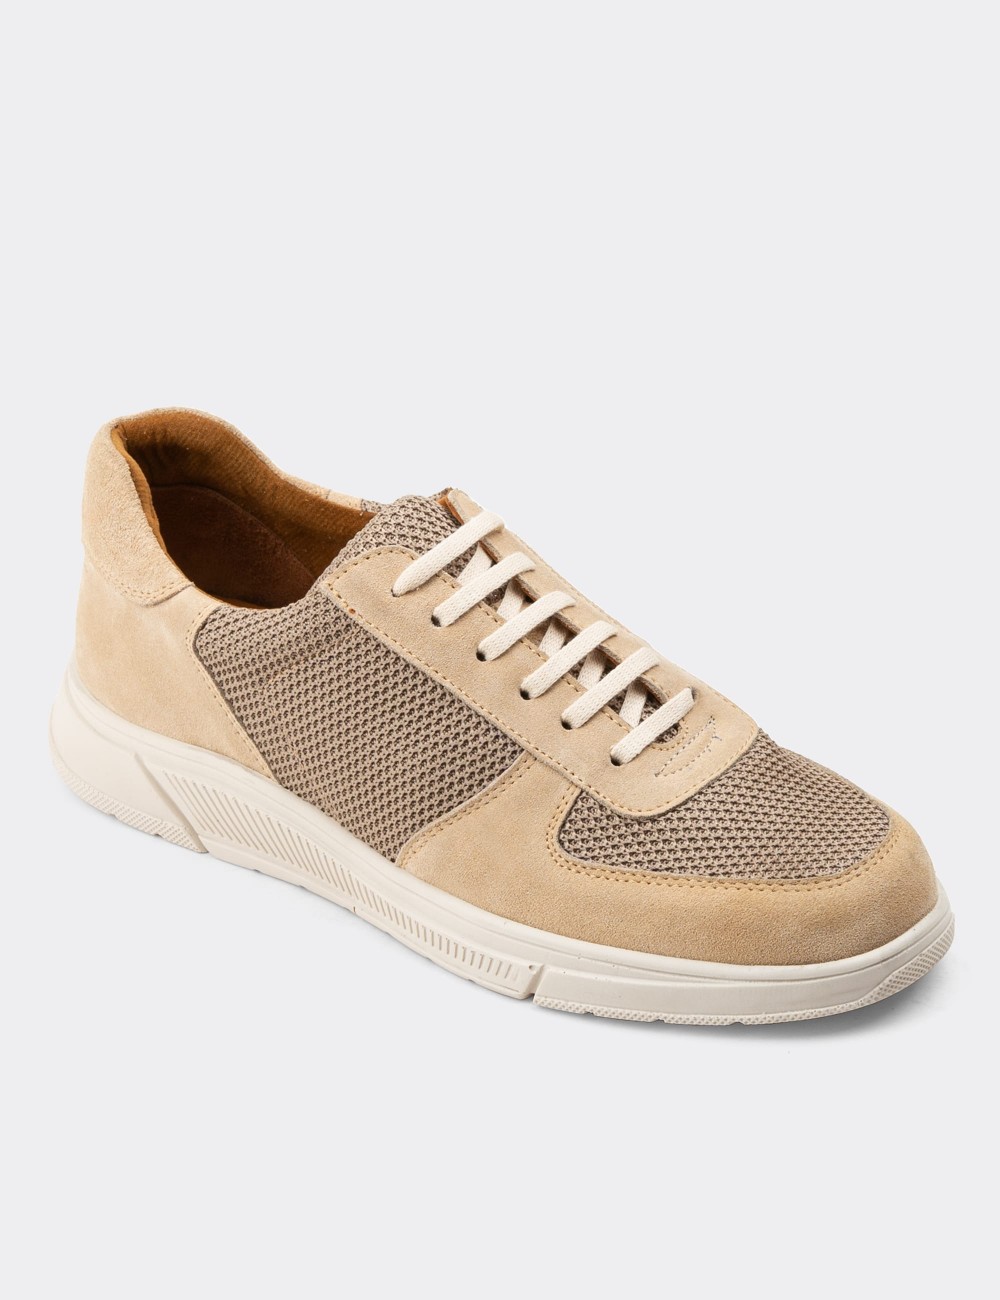 Beige Suede Leather Sneakers - 01860MBEJC01